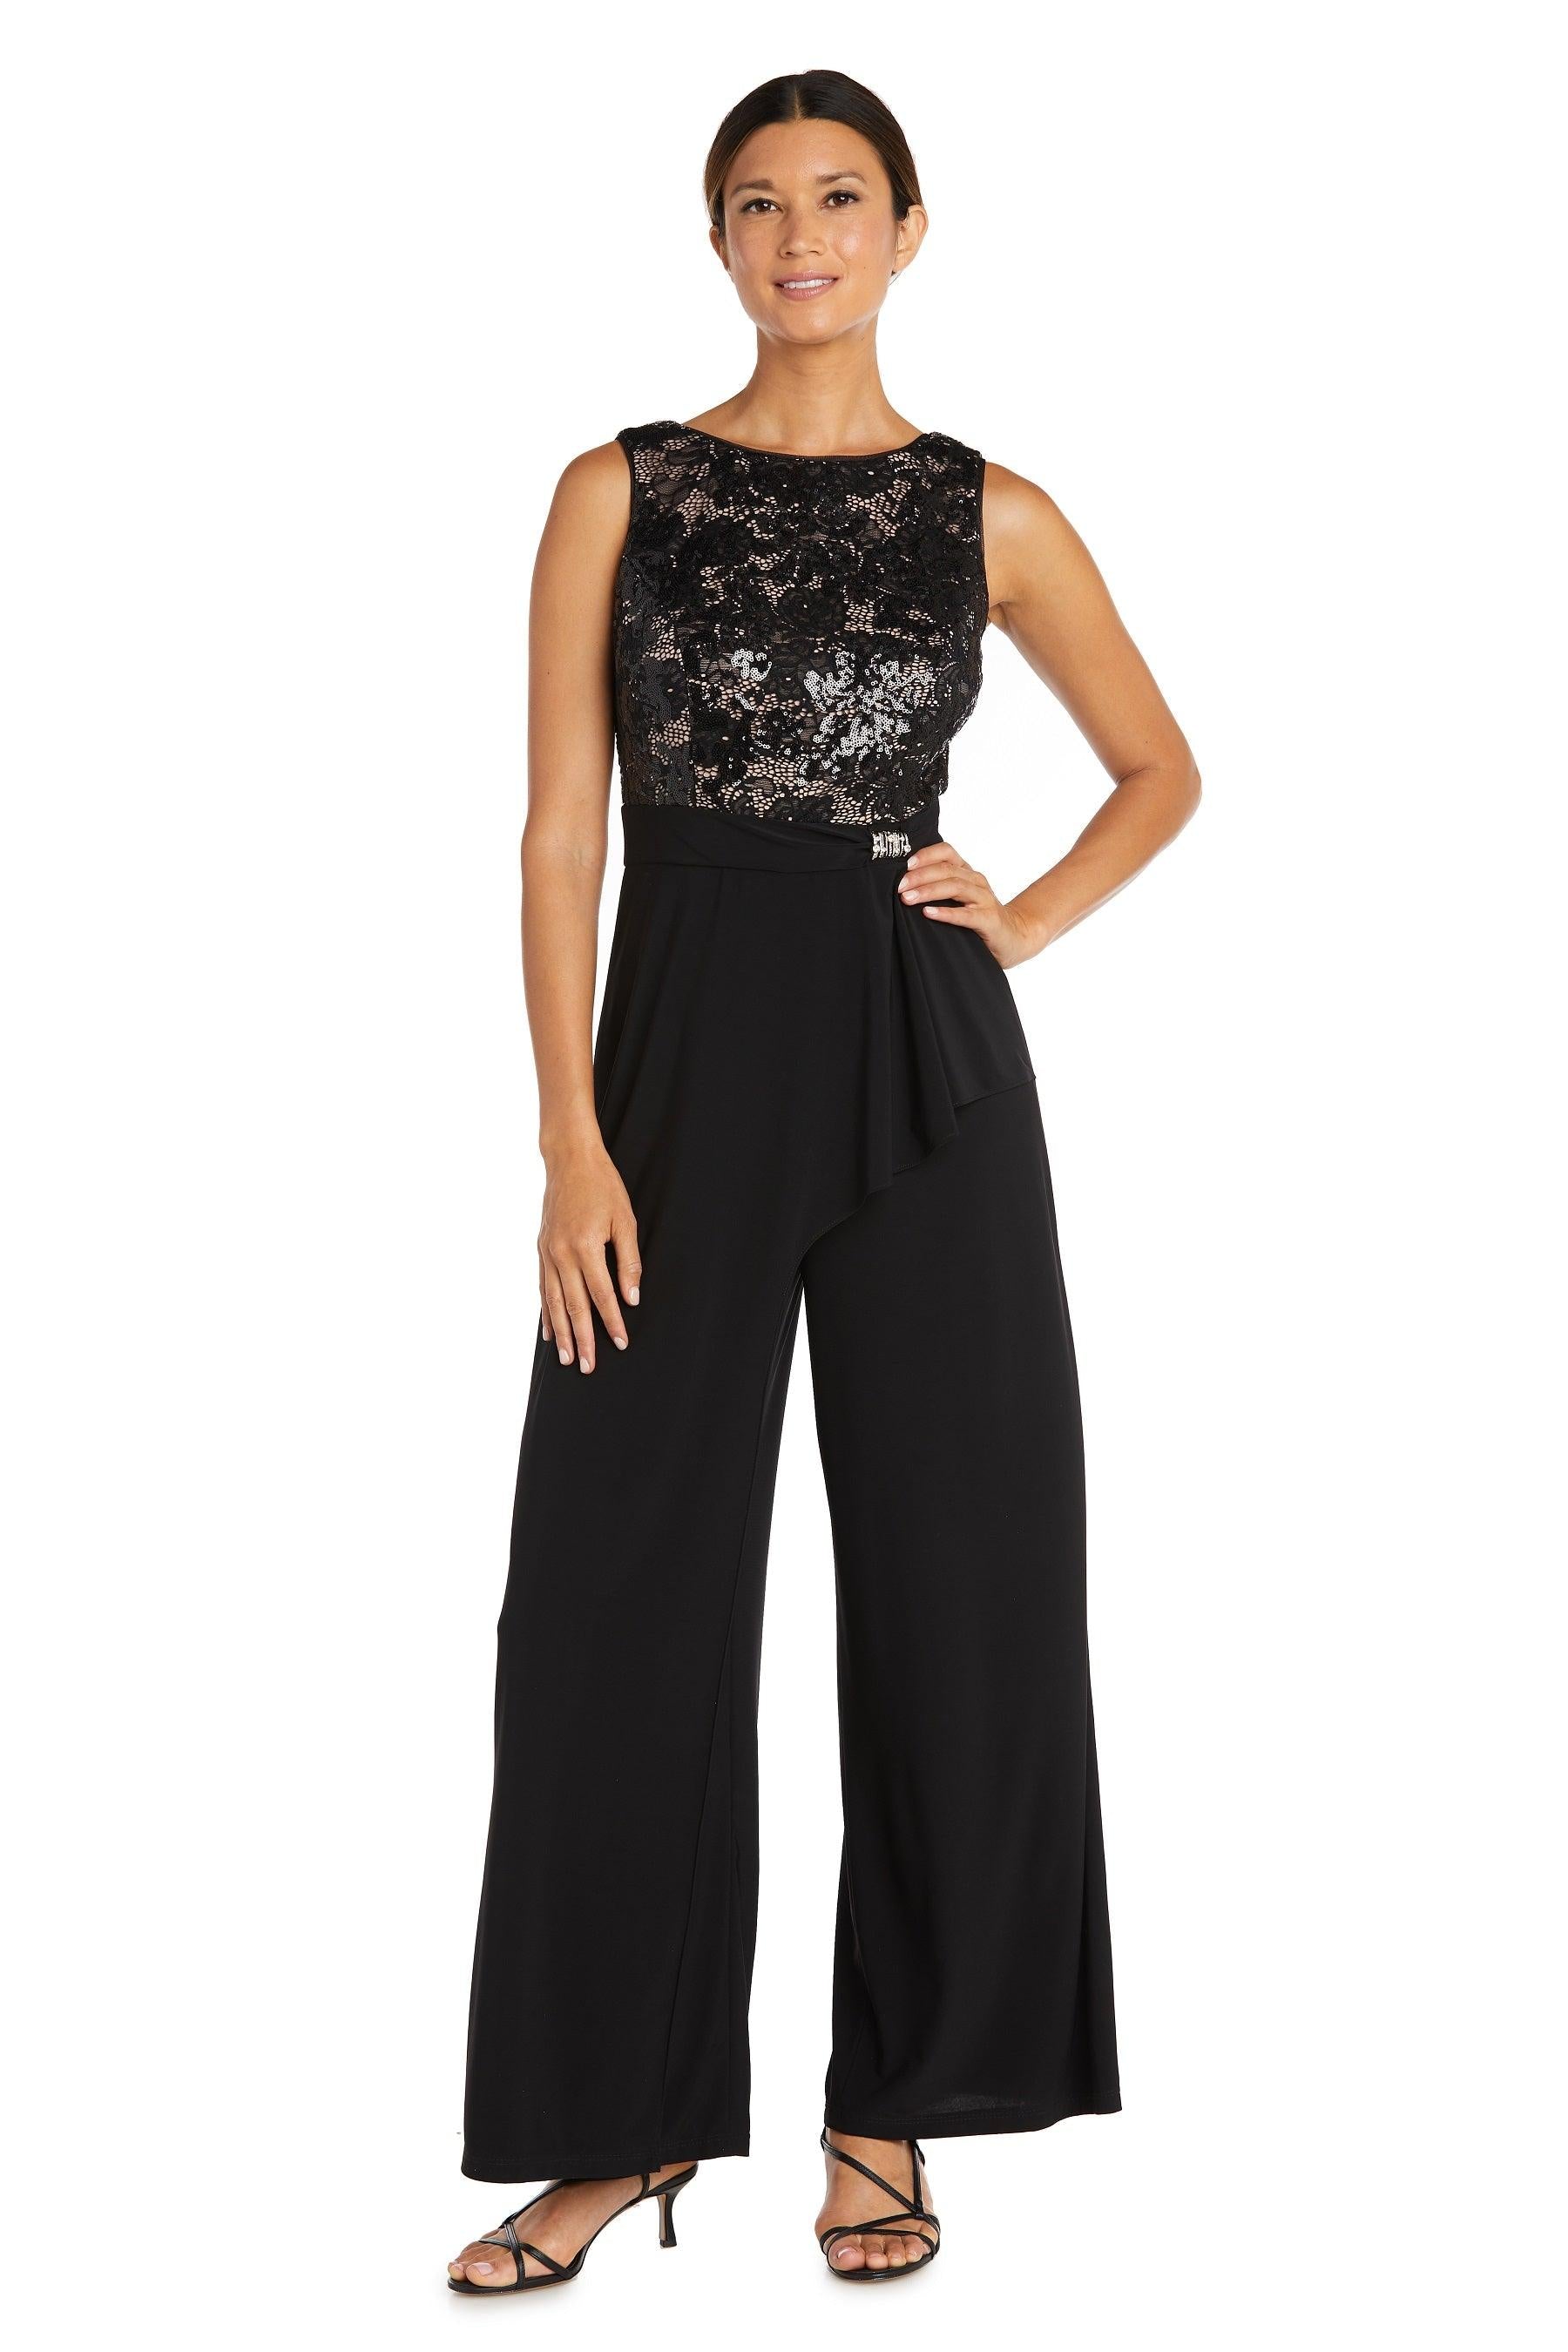 R&M Richards 9054P Formal Sleeveless Petite Jumpsuit | The Dress Outlet